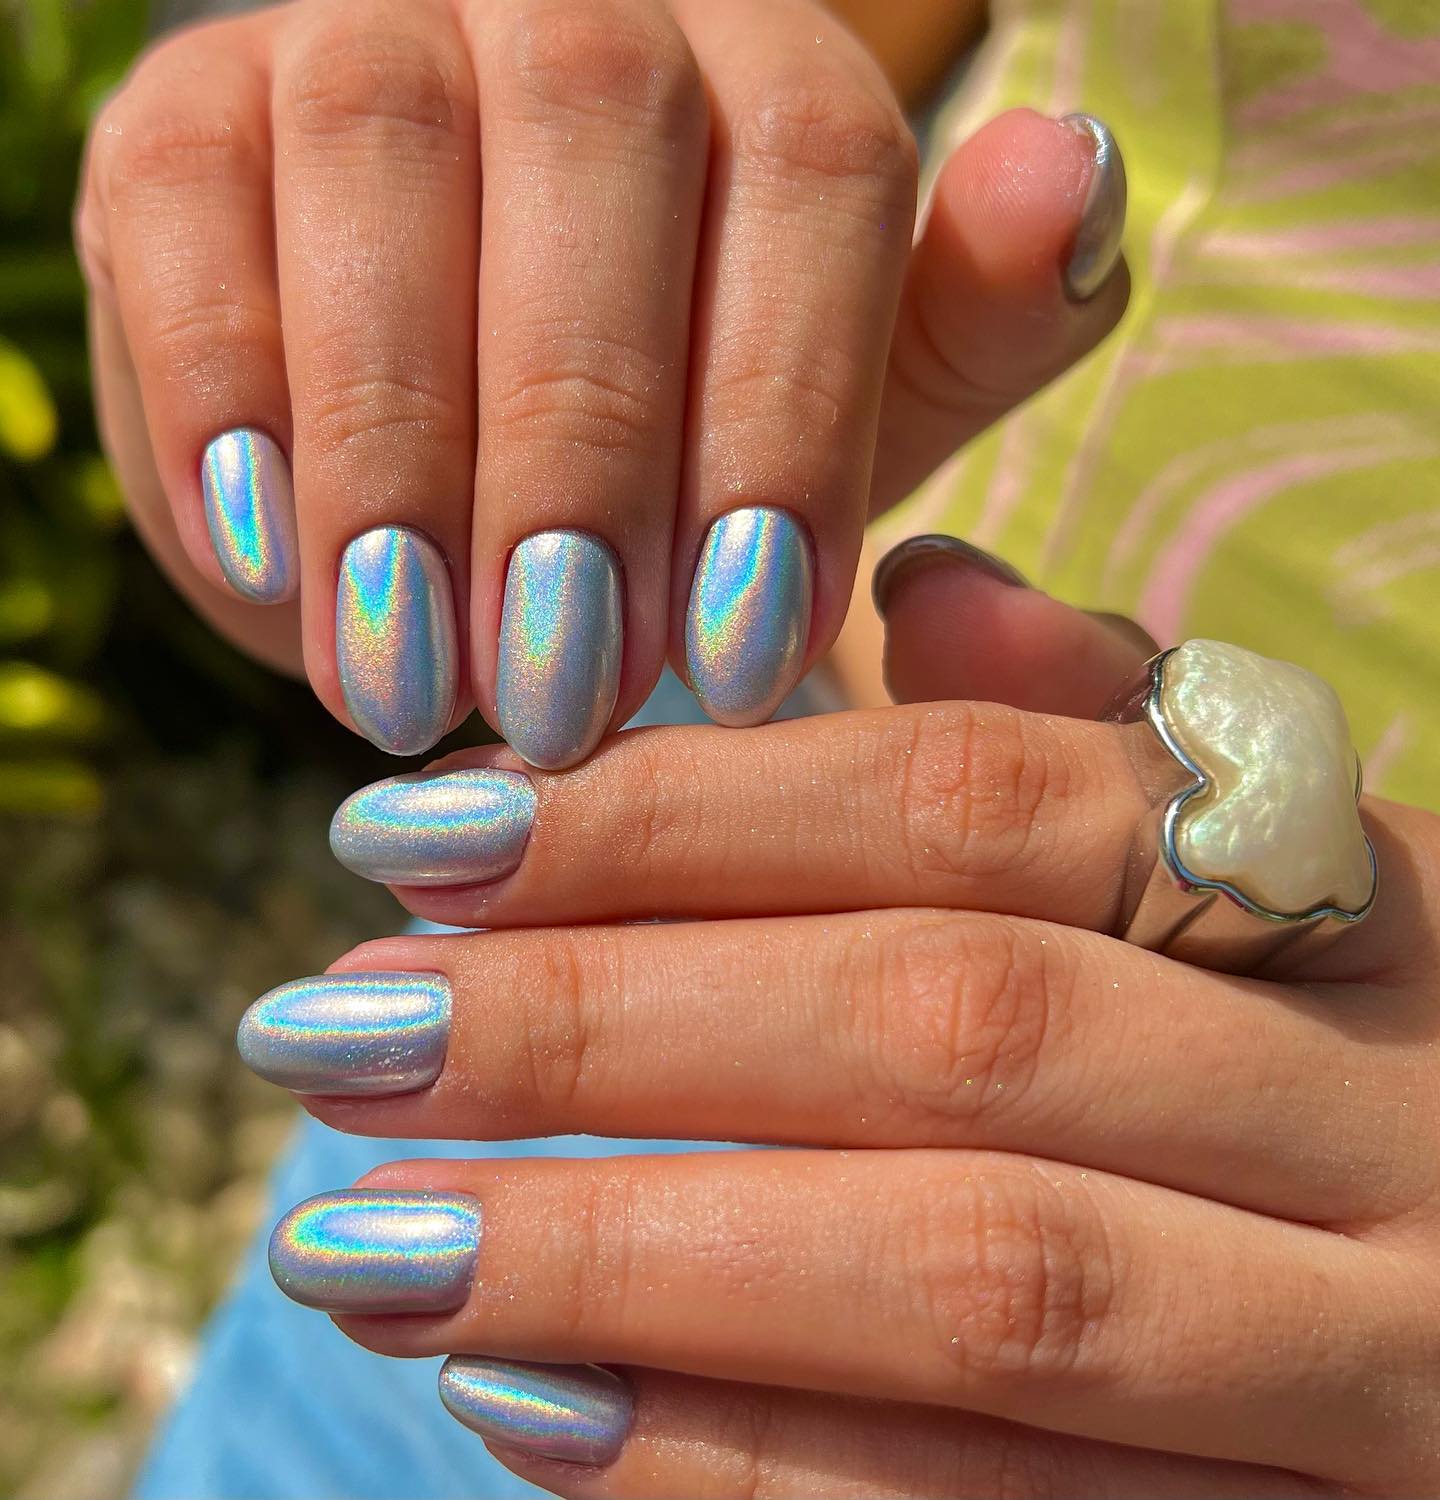 Hologram nail art is a technique that creates the appearance of a hologram using nail polish and a special top coat. Your short nails will shine with them.